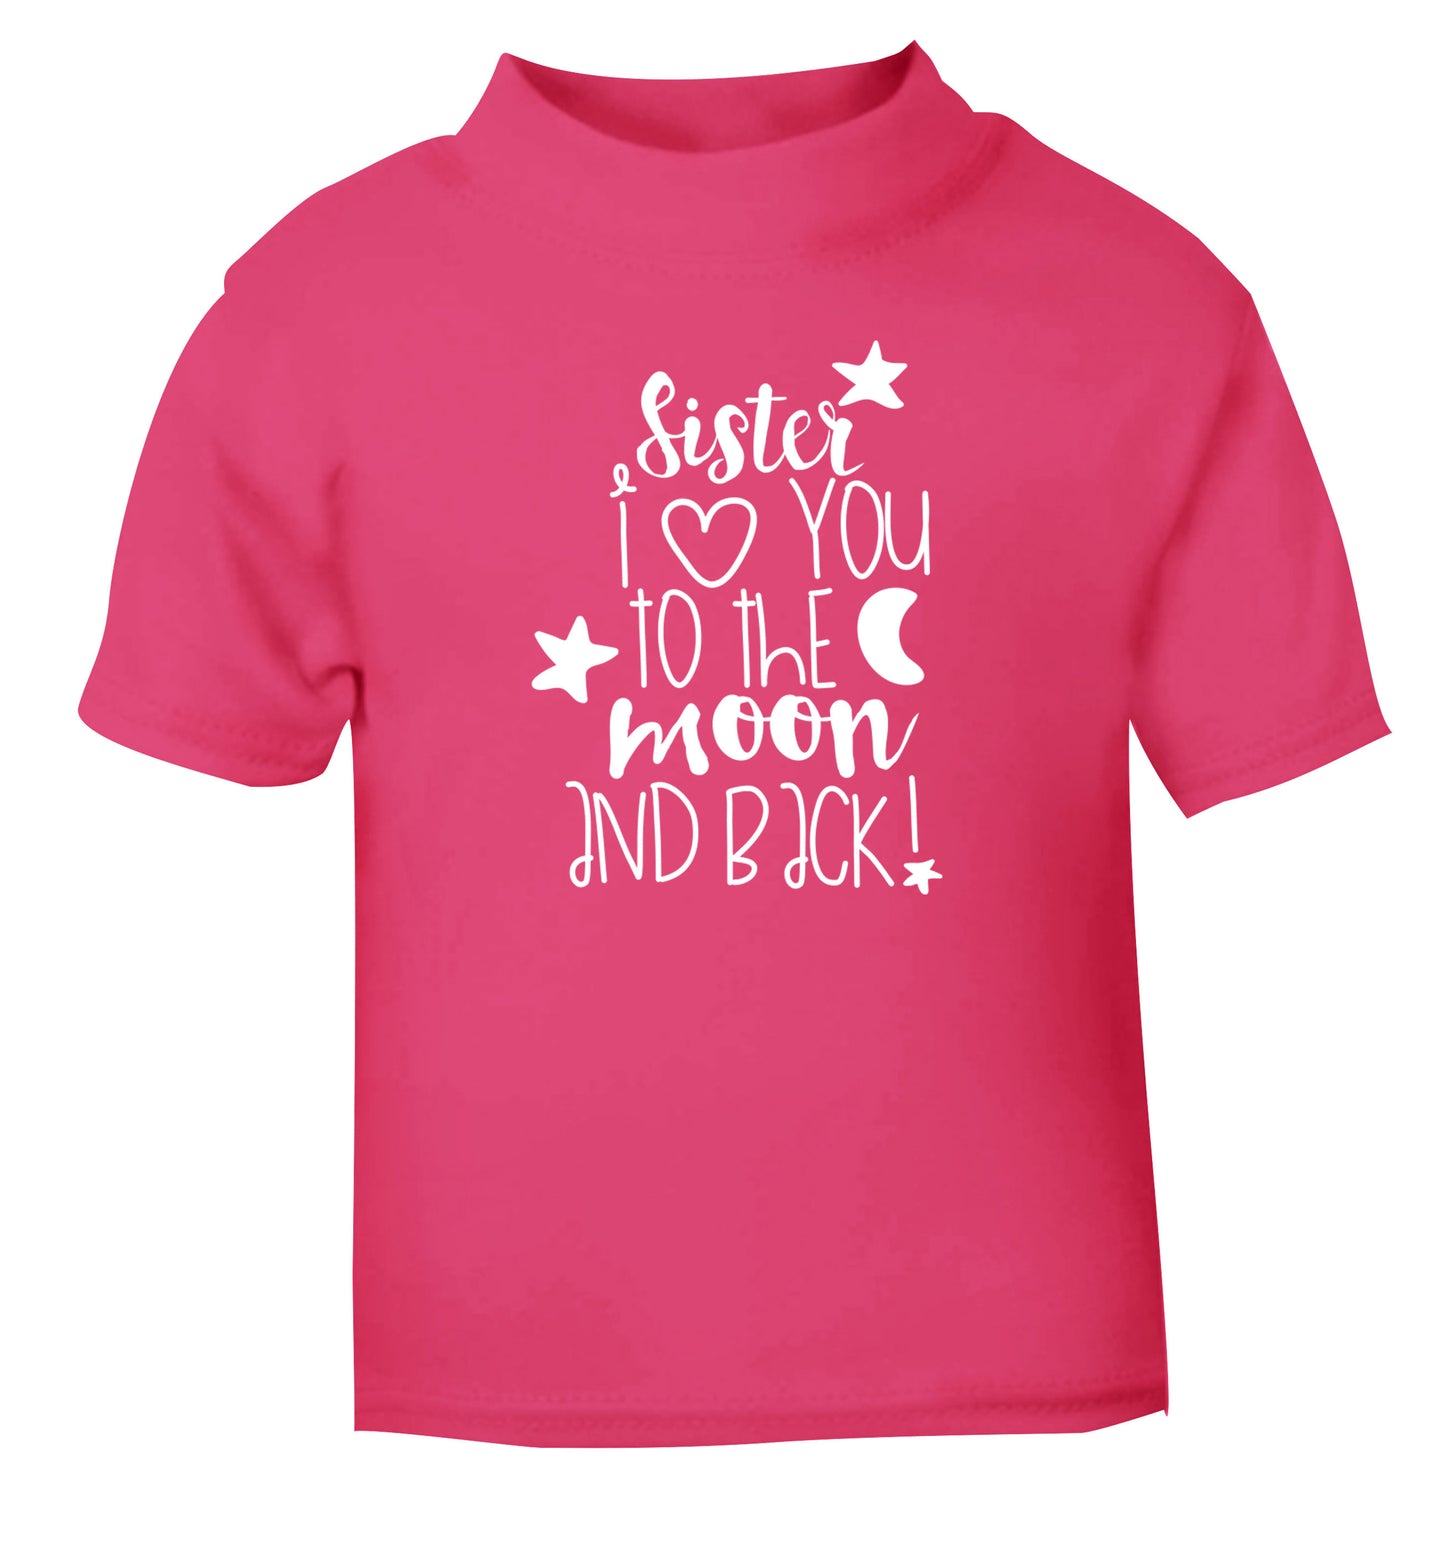 Sister I love you to the moon and back pink Baby Toddler Tshirt 2 Years